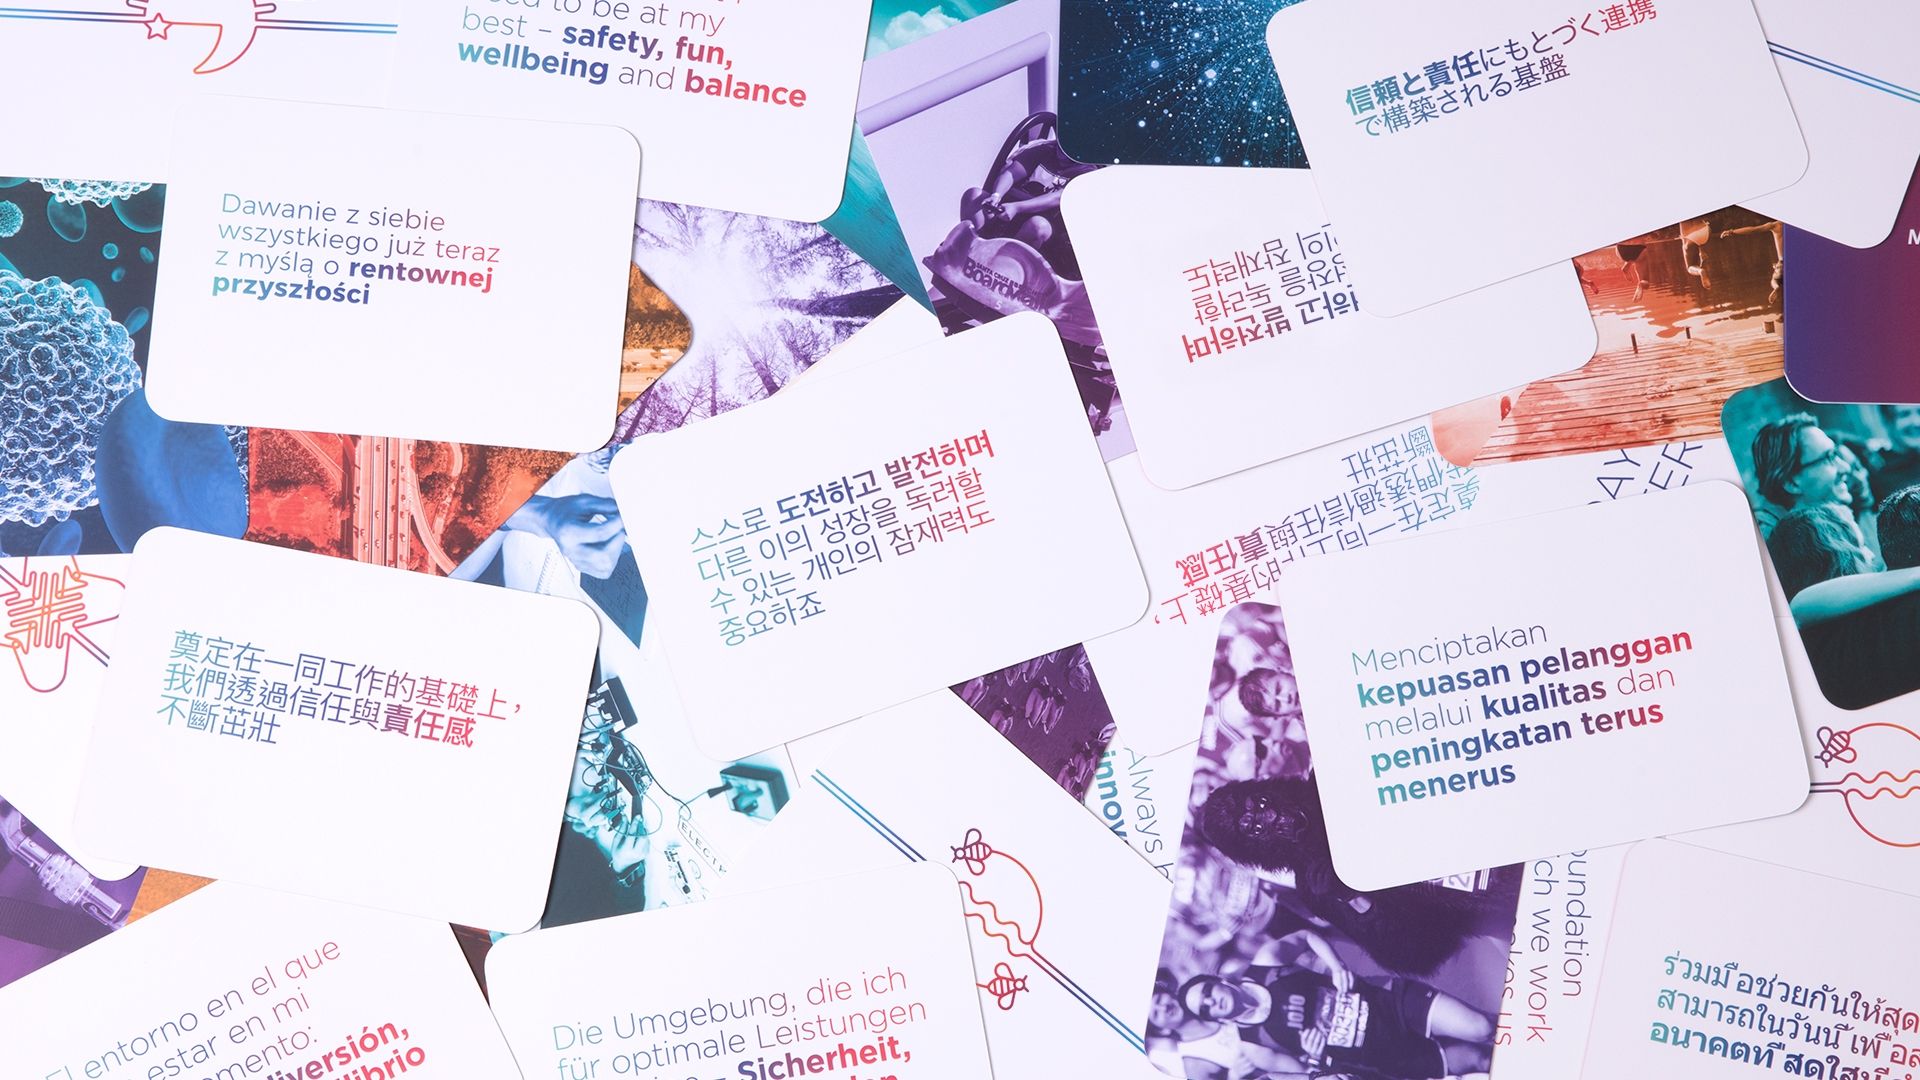 Saint Gobain Internal Communications Cards Showing Languages from the Company's 14 global locations